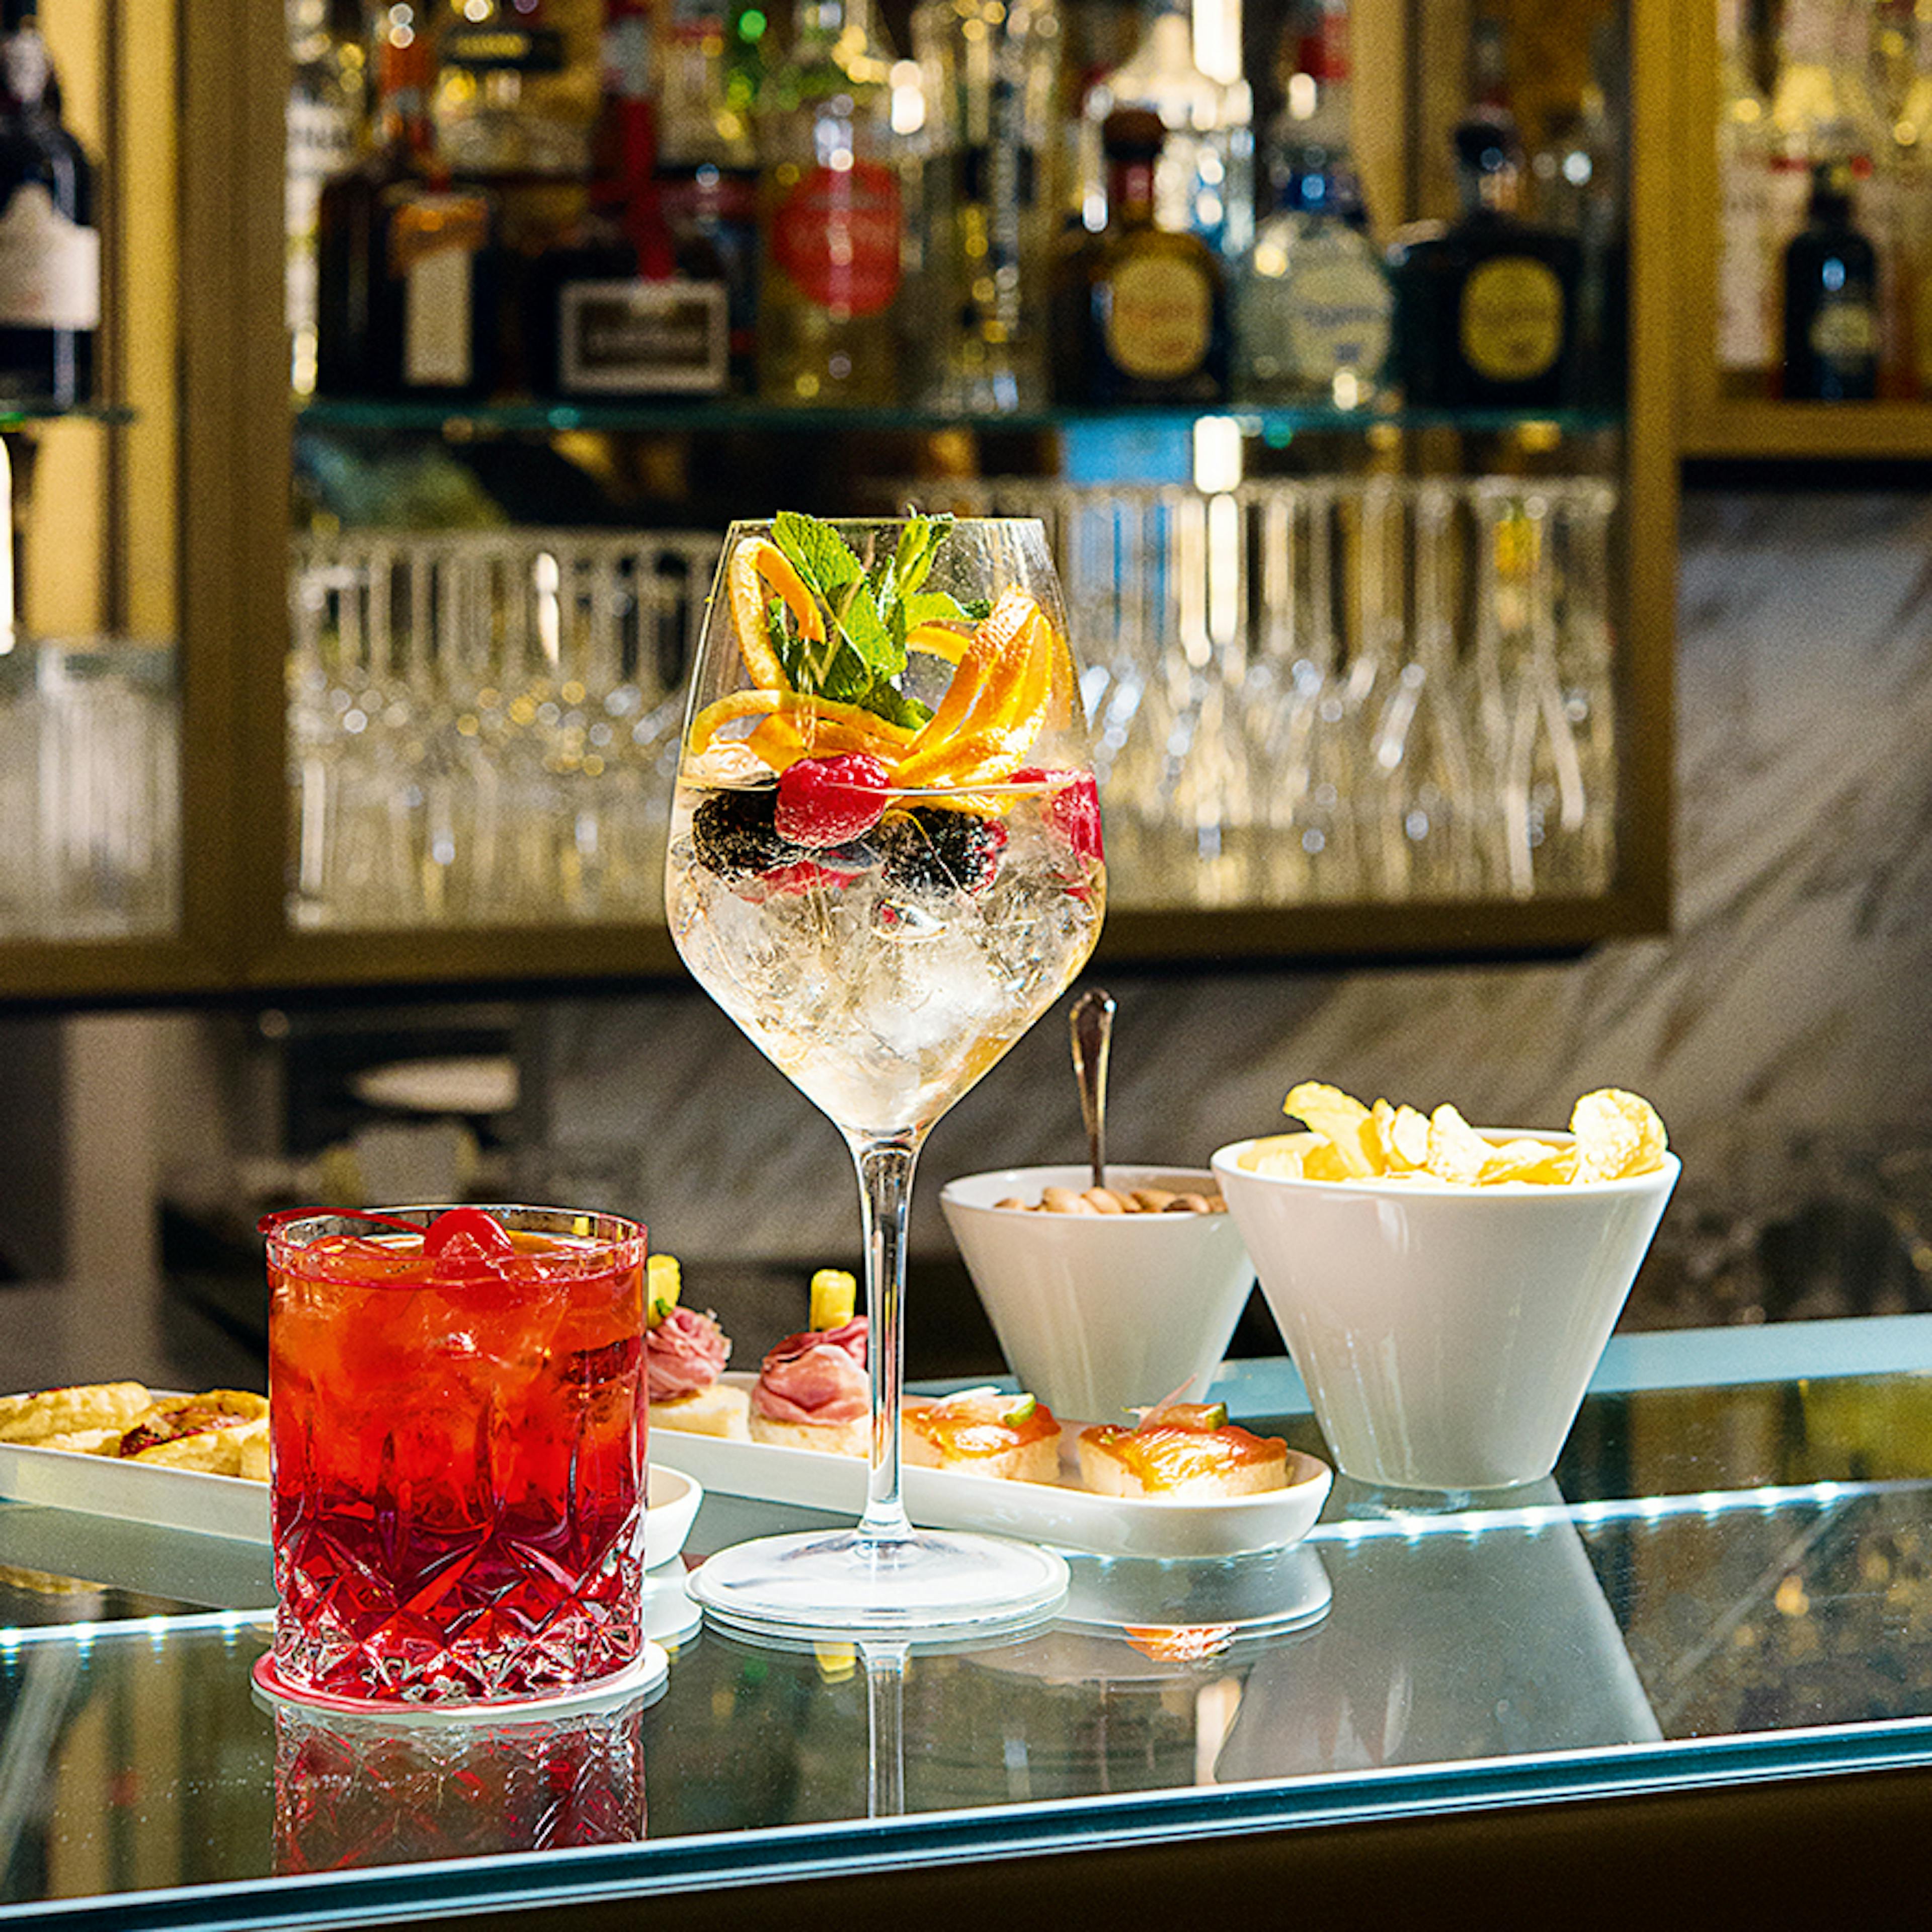 The Aperitivo served at the bar counter